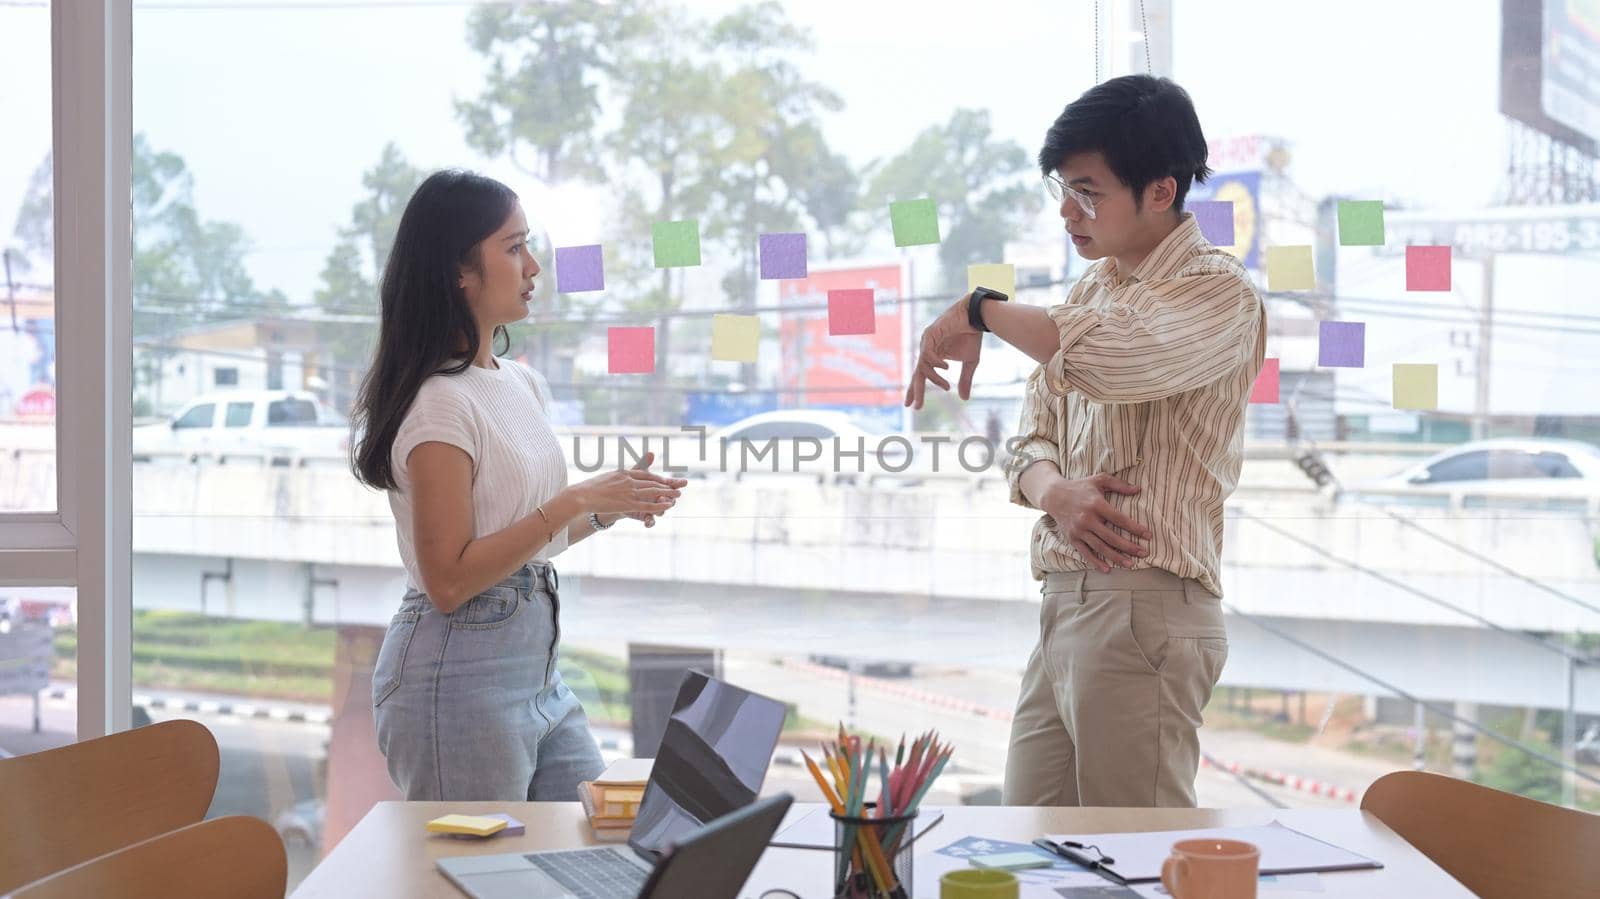 Two young businesspeople standing near large window at office with city buildings in background. by prathanchorruangsak